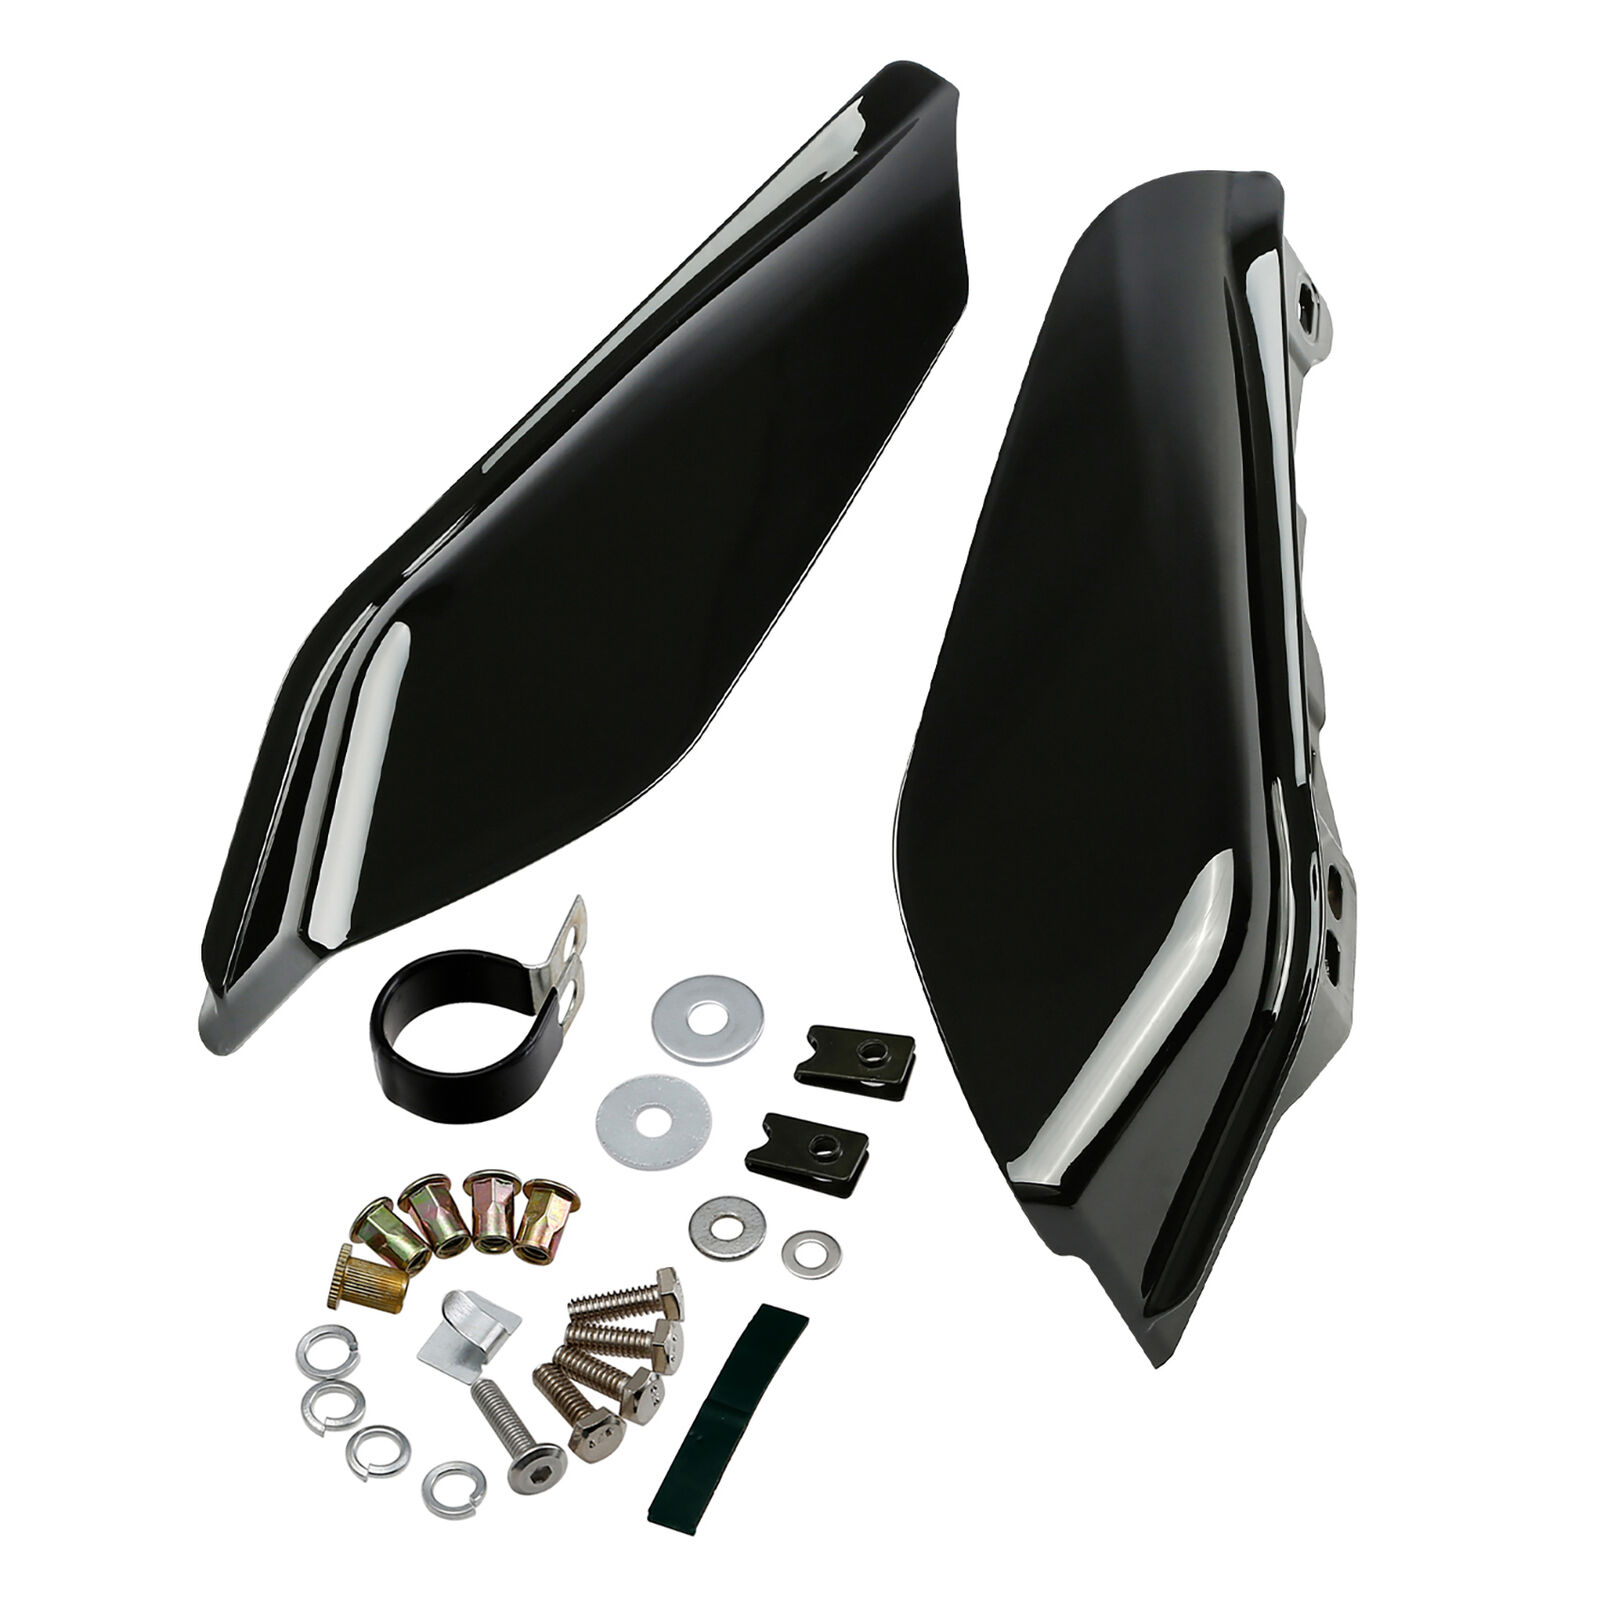 ABS Mid-Frame Air Deflector Heat Shield Fit For Harley Street Road Glide 09-up